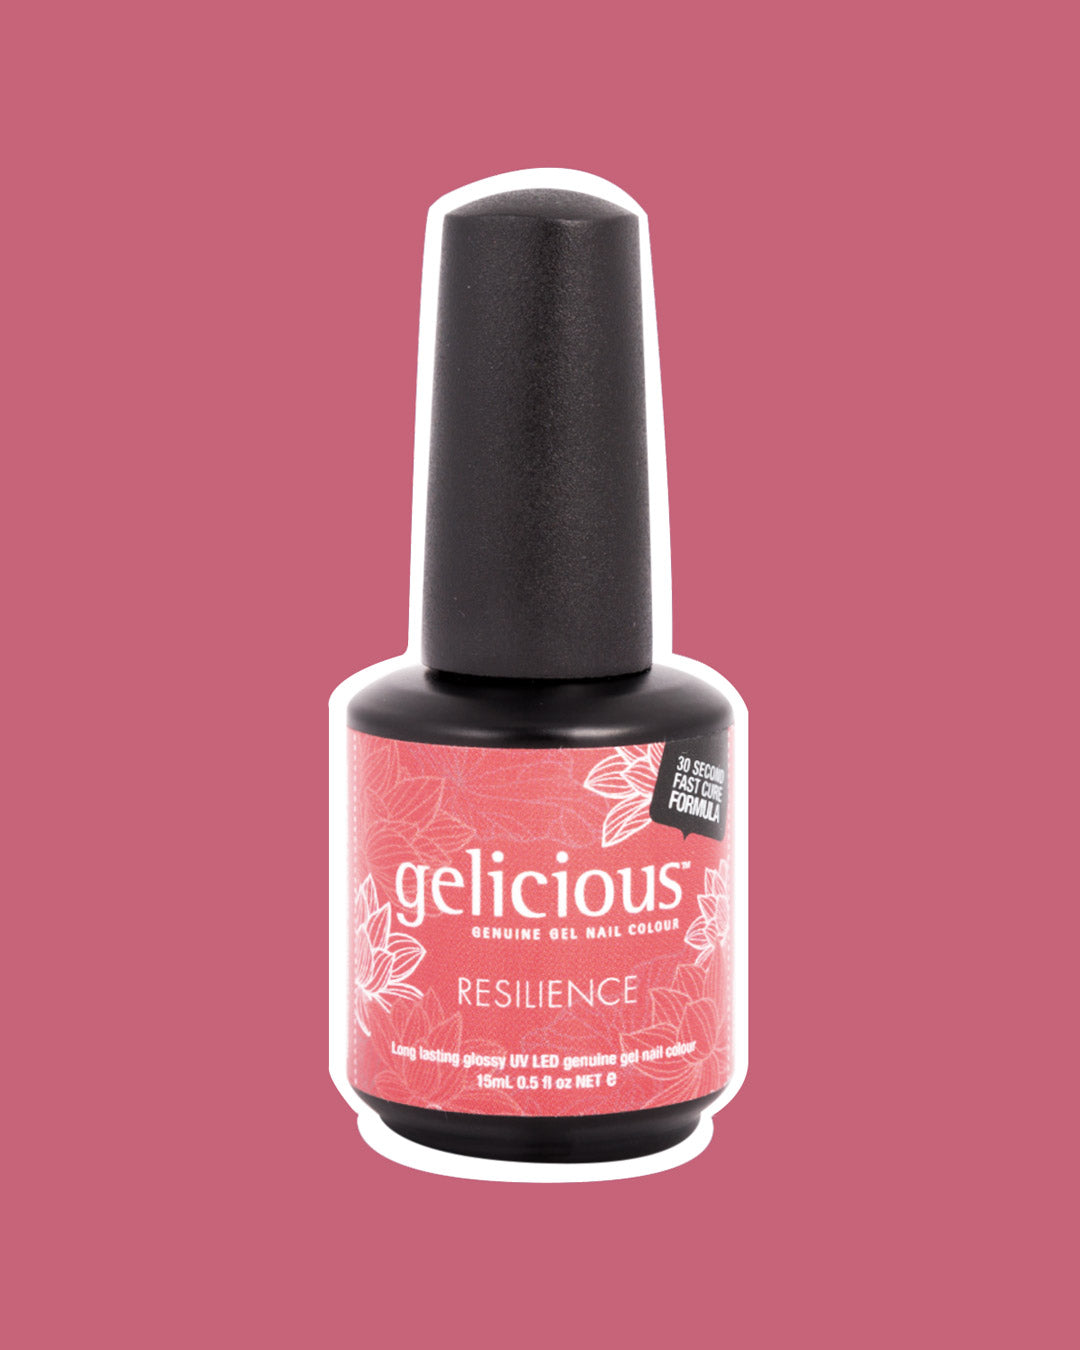 Gelicious Resilience